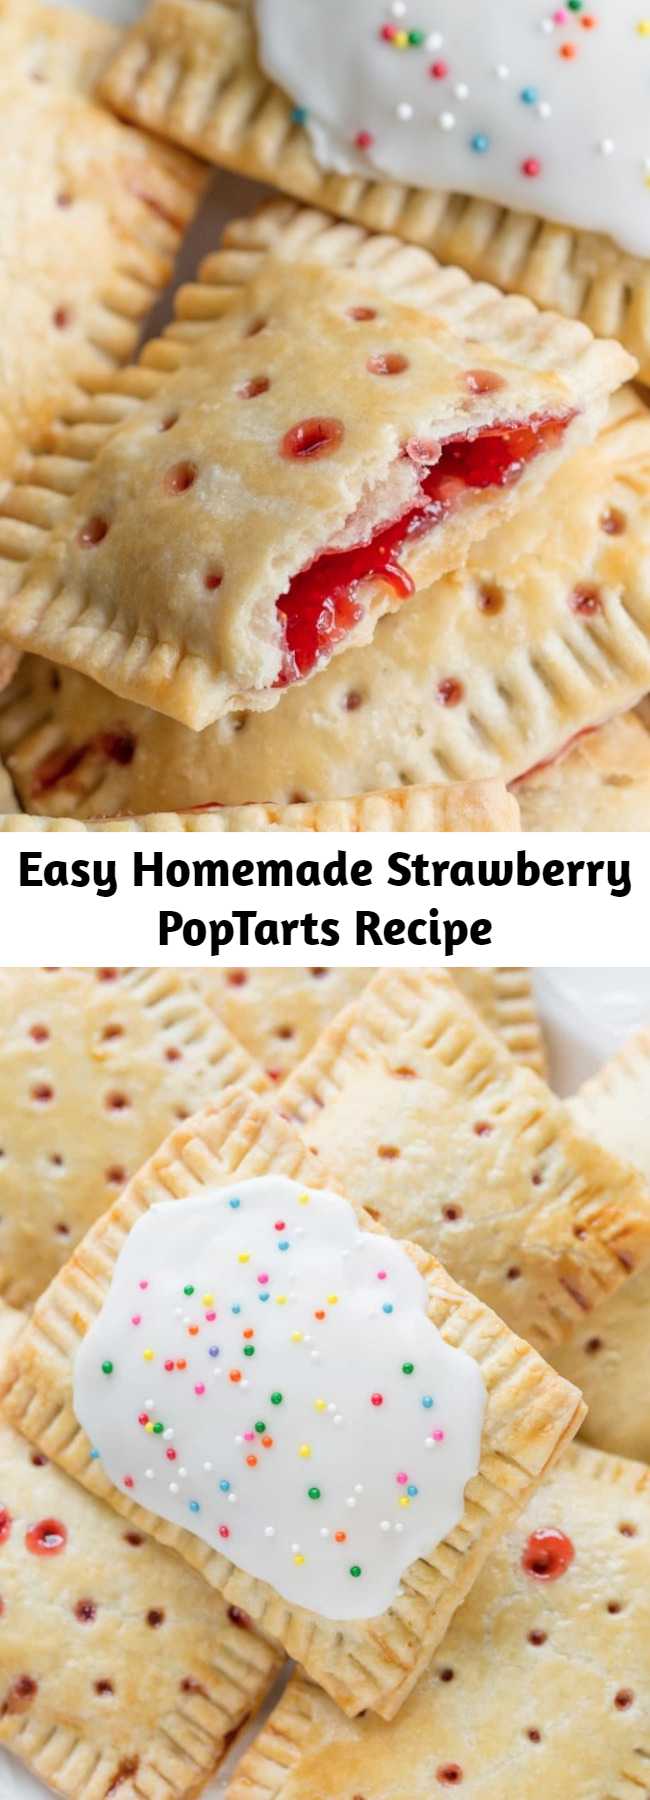 Easy Homemade Strawberry PopTarts Recipe - Flaky pastry filled with homemade strawberry jam or your favorite pie filling. #poptarts #strawberry #handpies #strawberrypie #strawberrypoptarts #flakycrust